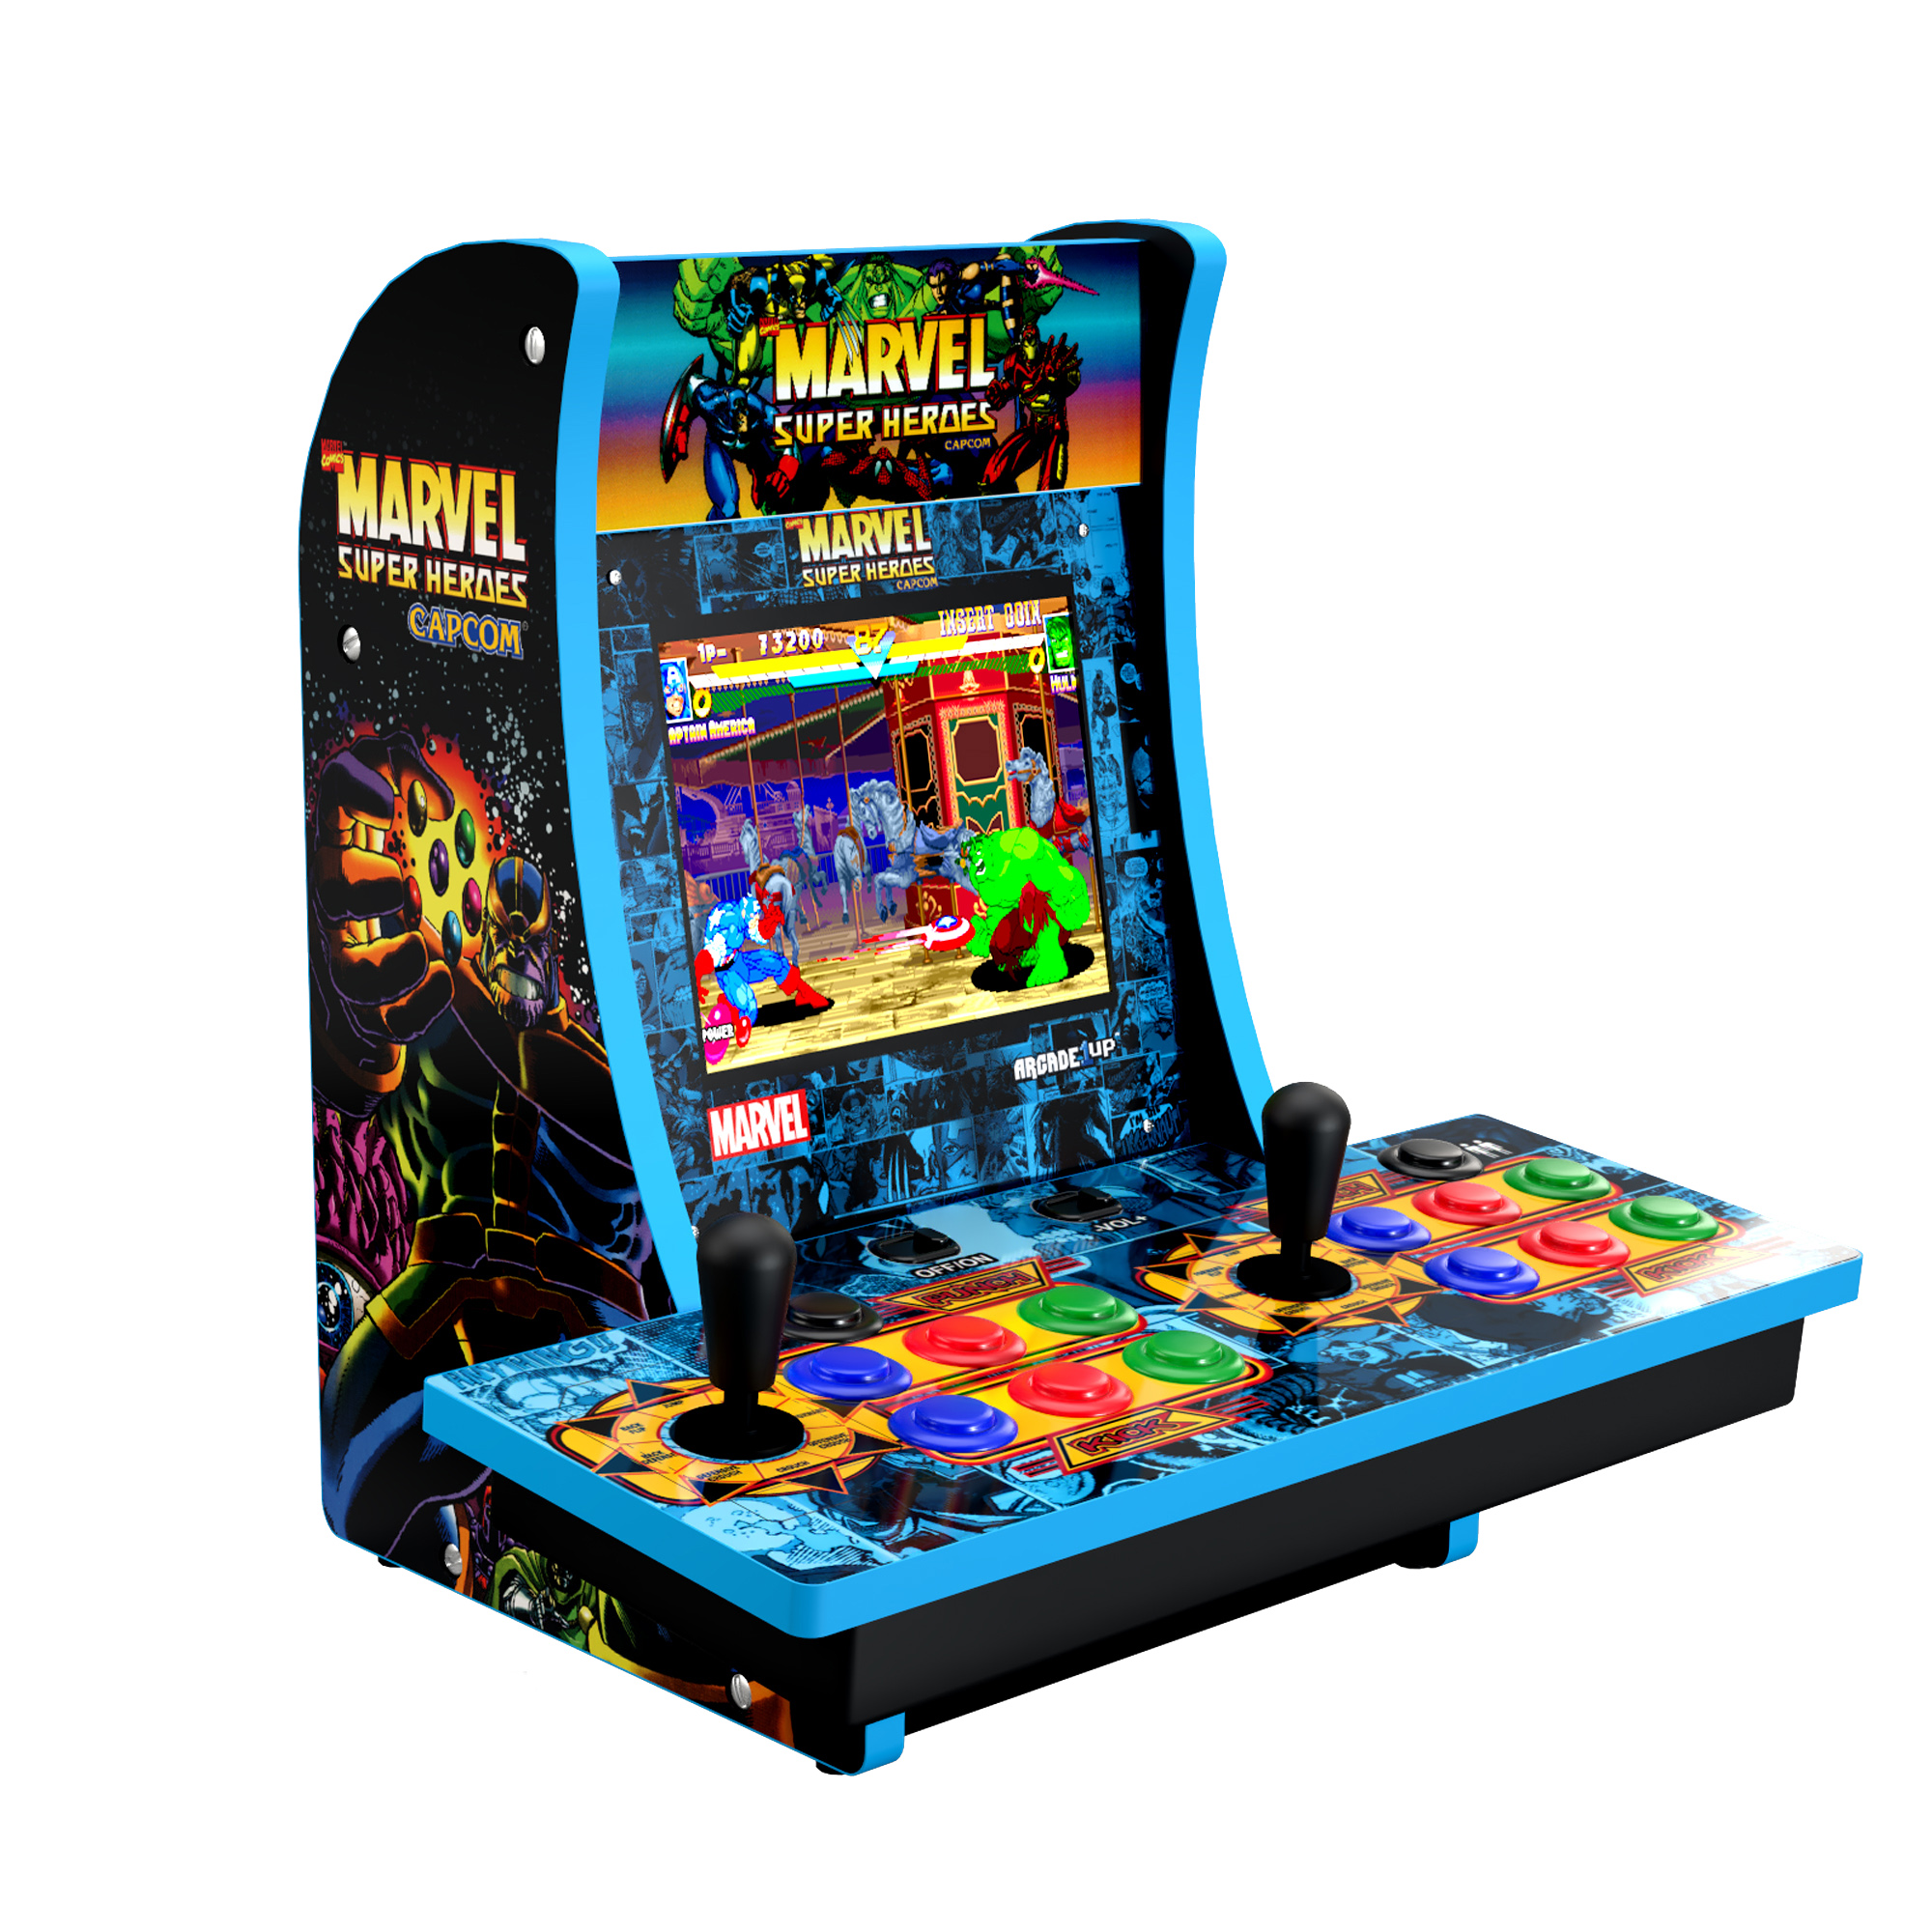 Arcade1UP Marvel Superheroes (2-Player) Counter-cade with Lit Marquee, Port and Headphone Jack - image 2 of 8